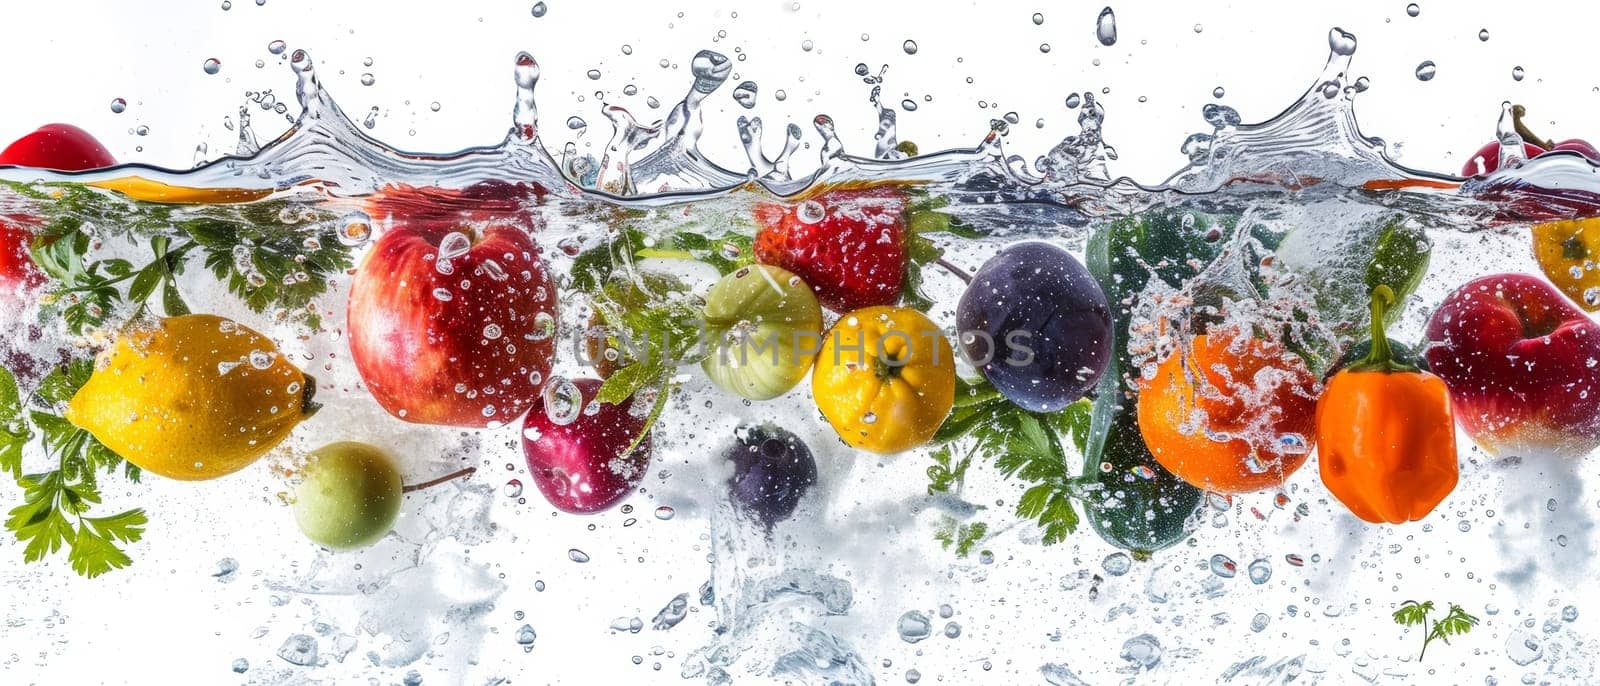 A dynamic display of various fruits and vegetables with a splash in clear water, capturing motion and freshness